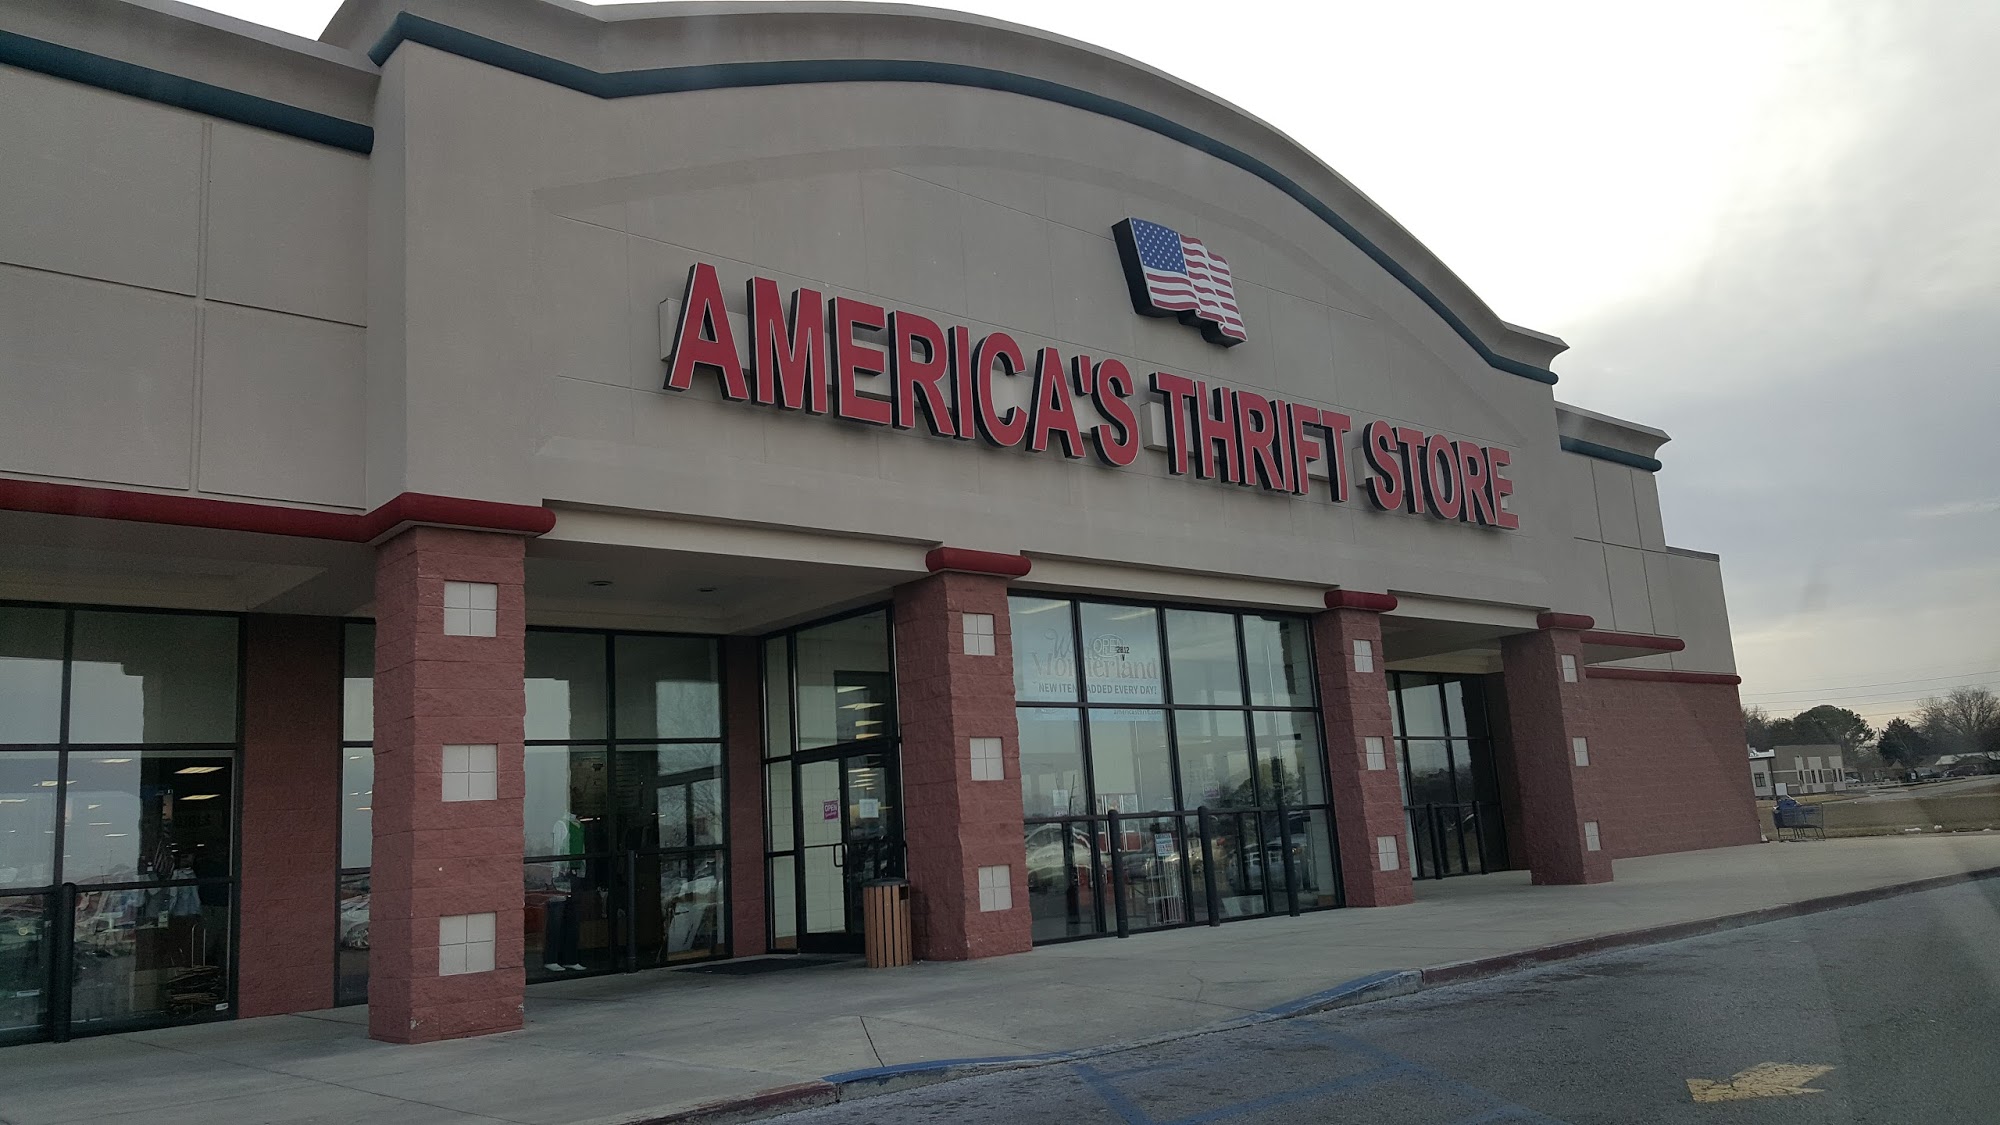 America's Thrift Stores & Donation Center